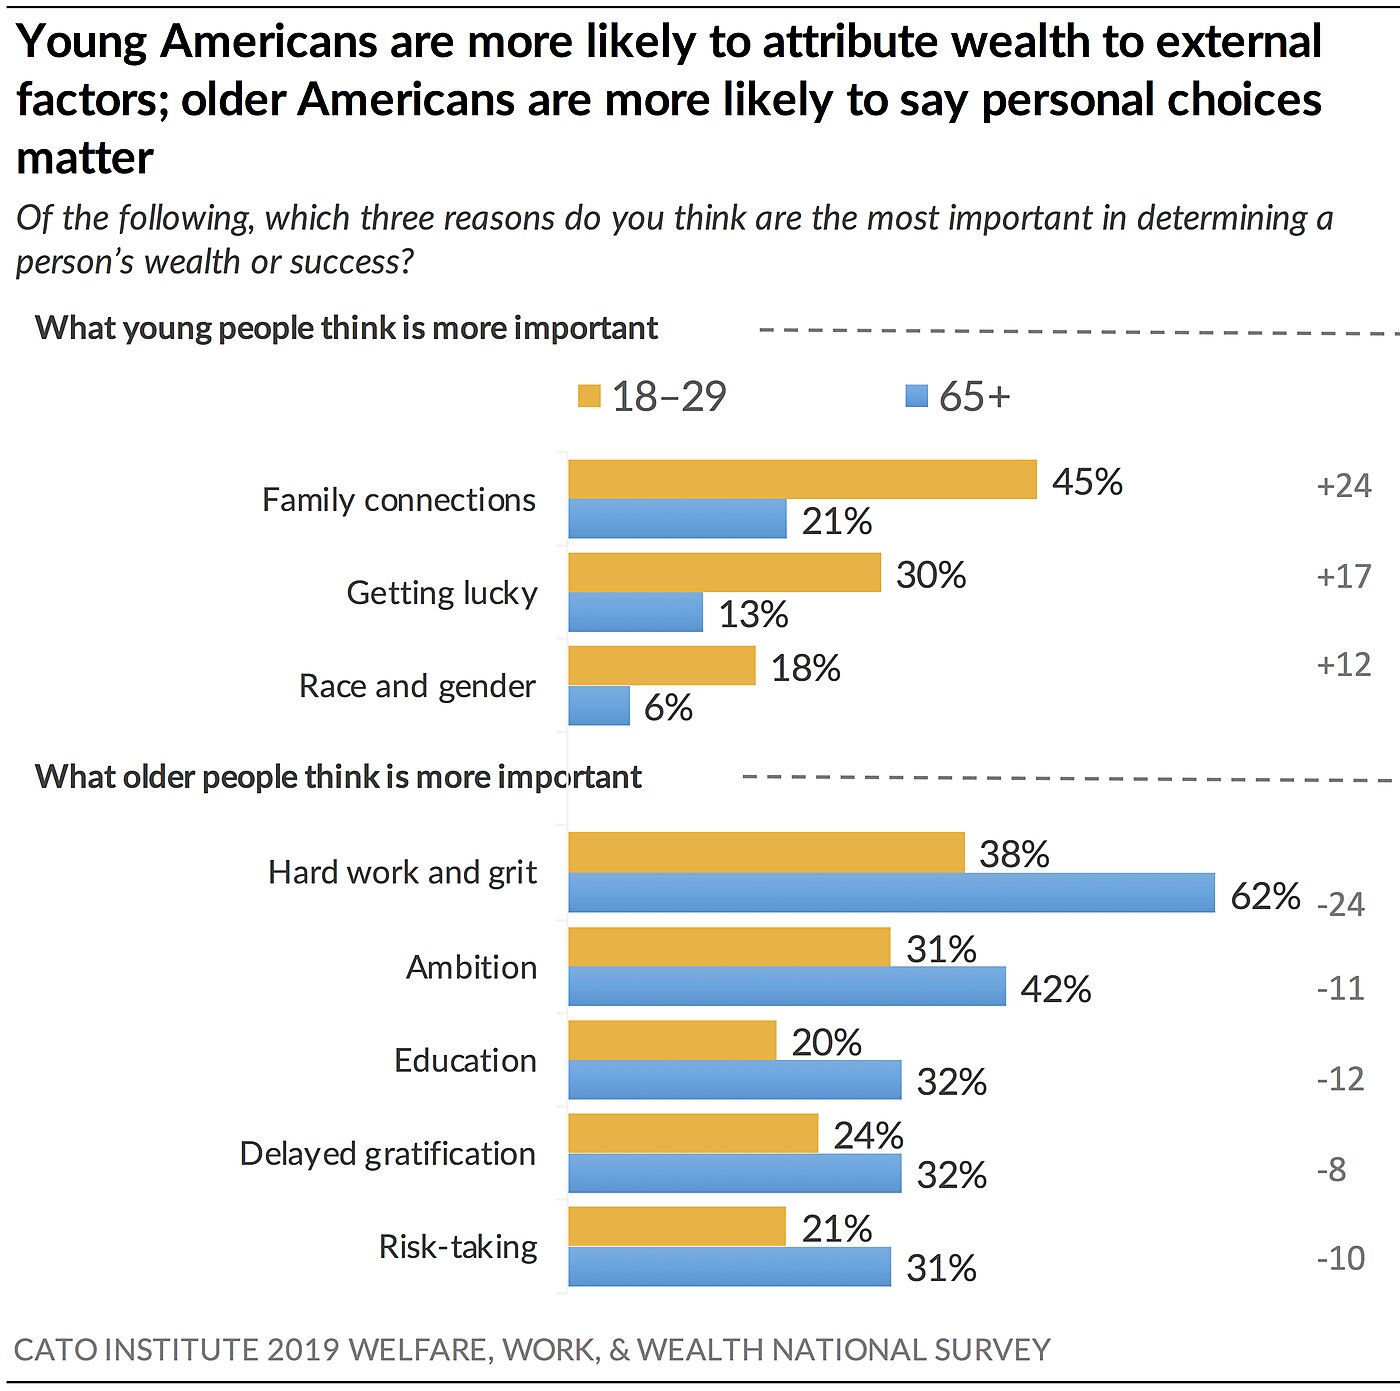 Young Americans More Likely To Attribute Wealth to External Factors